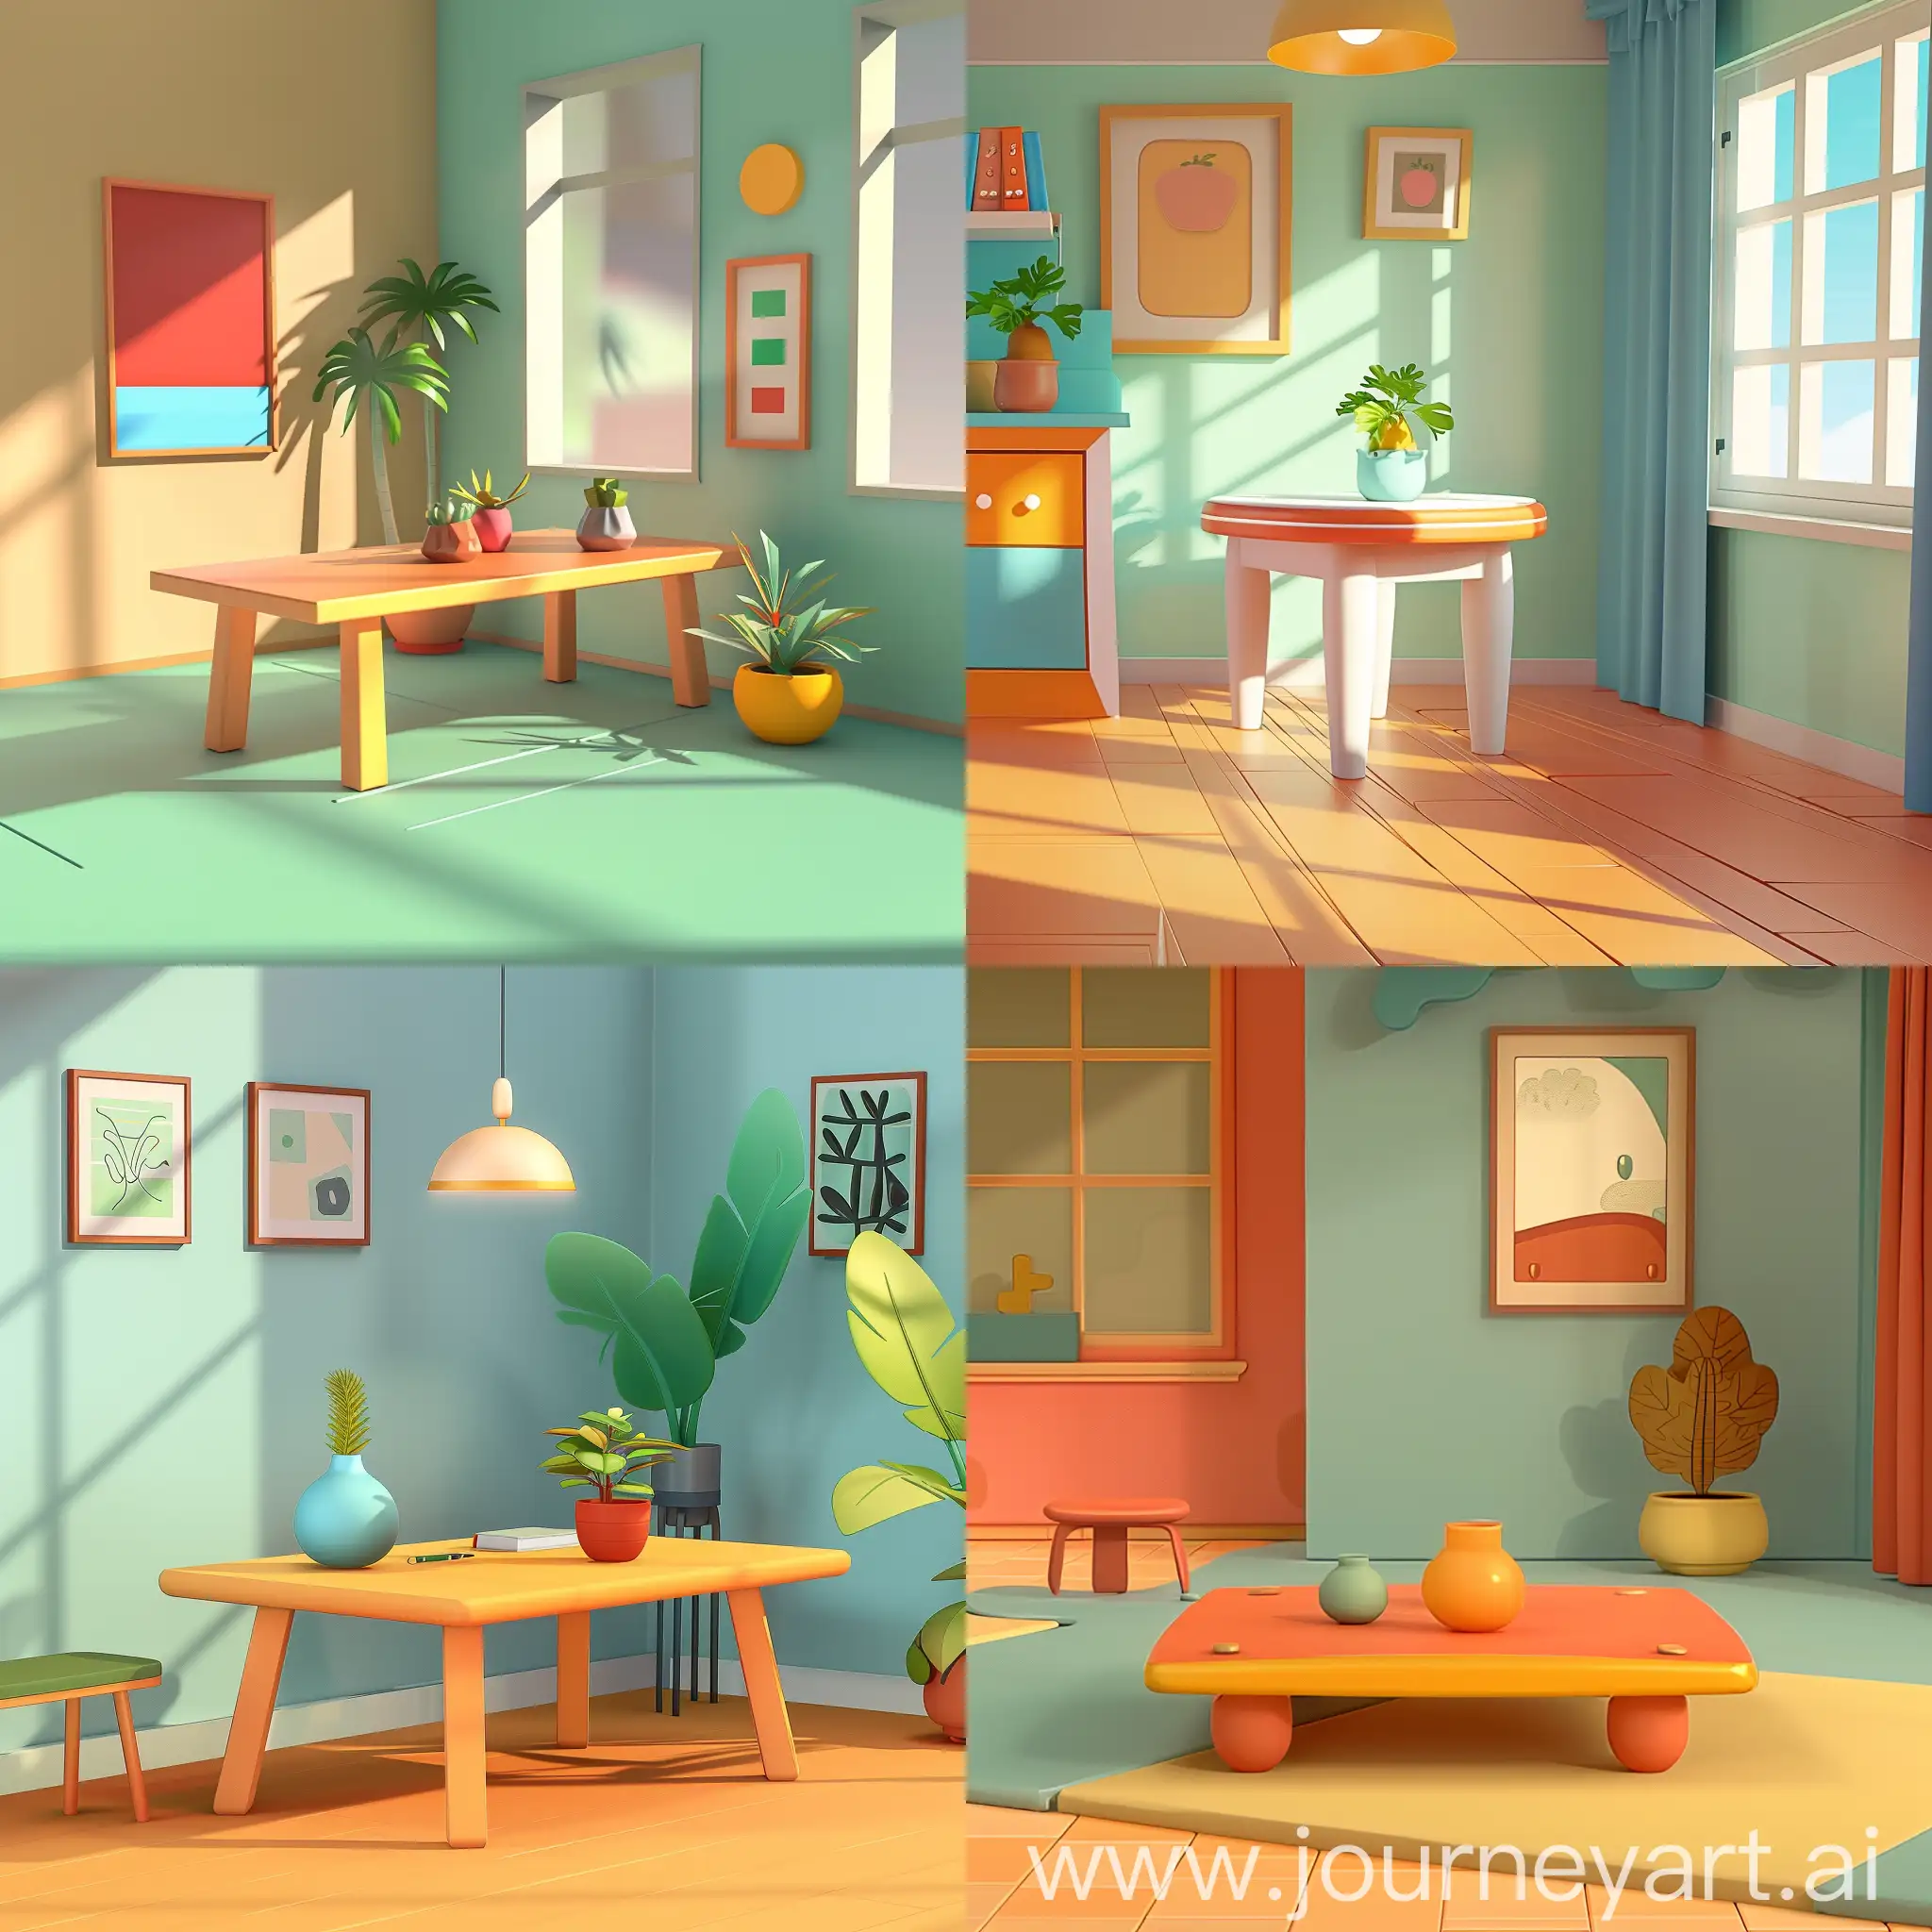 Create a 3D cartoon image of a room with a table
